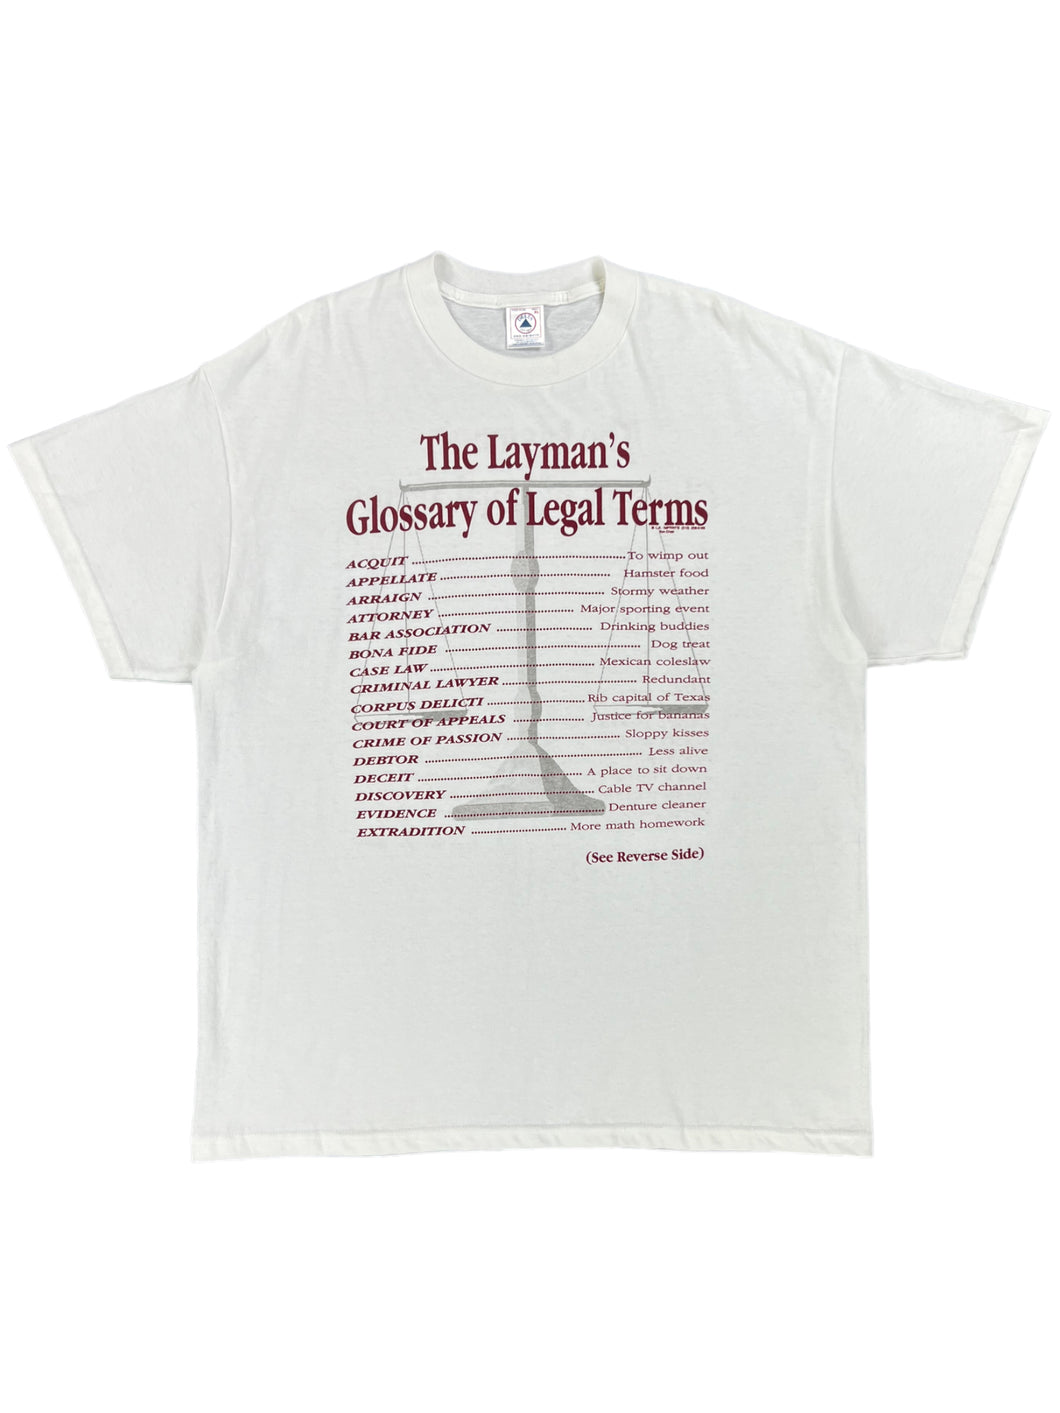 Vintage 90s The Layman’s Glossary of Legal Terms Lawyer attorney text tee (XL)